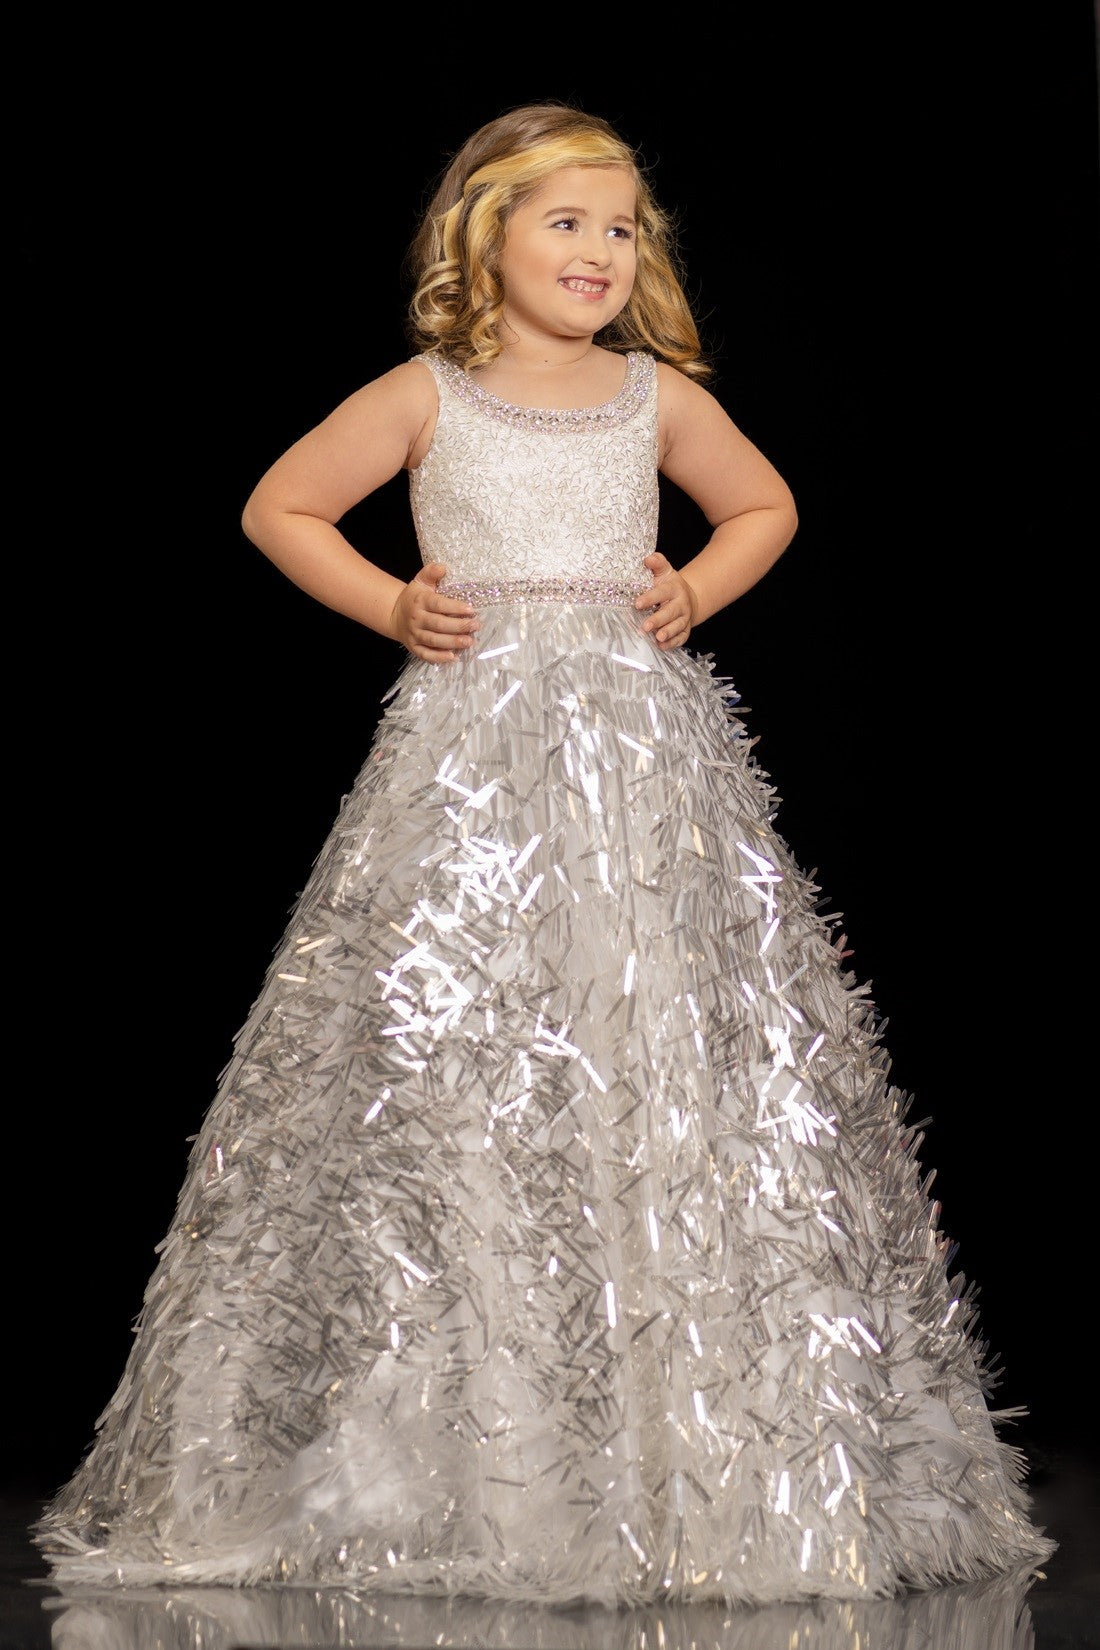 Sugar Kayne C100 by Johnathan Kayne is a Girls & Preteens long Pageant A Line Ballgown with a sequin fringe skirt. Scoop neckline with crystal embellished edges around top & waistline.   Available Colors: White, Blue/Multi, Pink/Multi  Available Size: 2-16